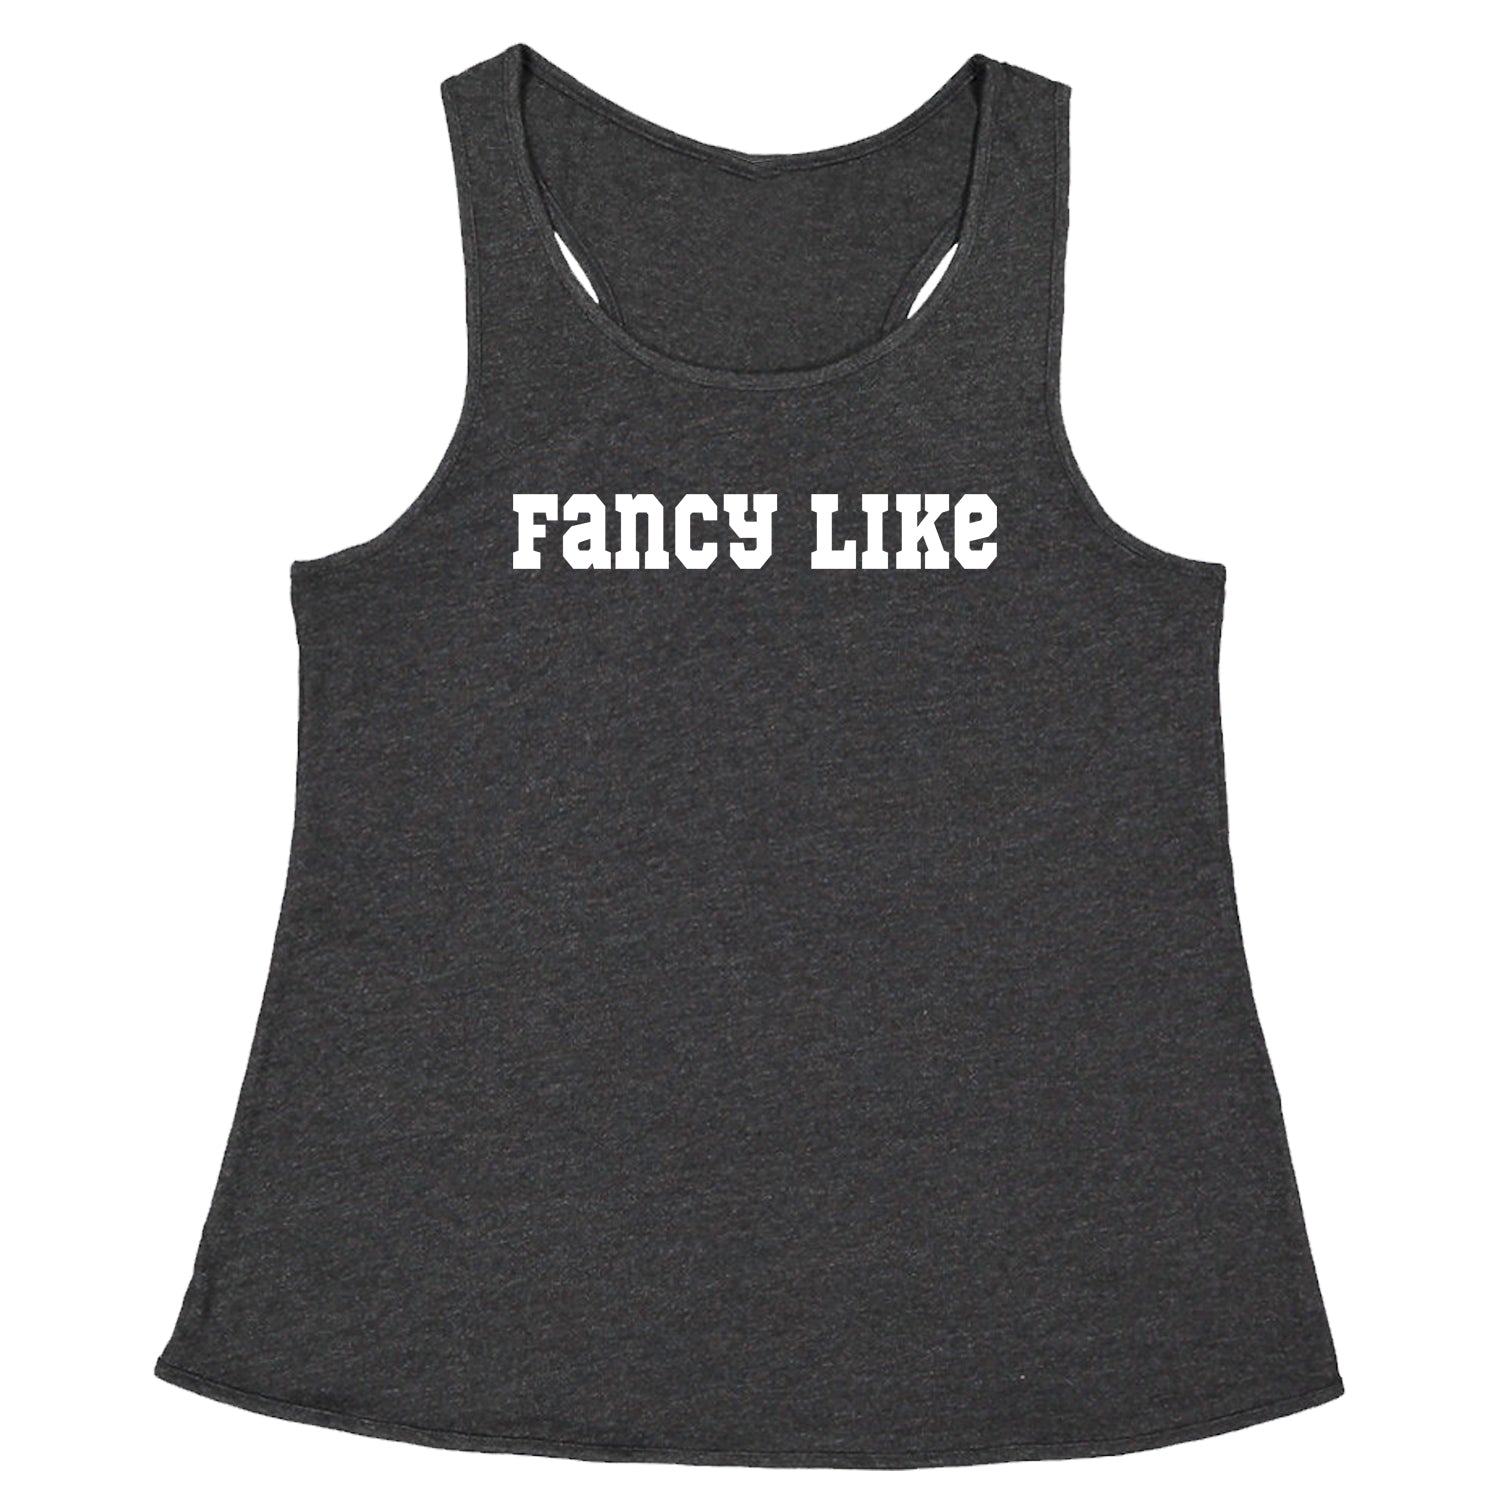 Fancy Like Racerback Tank Top for Women hayes, walter by Expression Tees